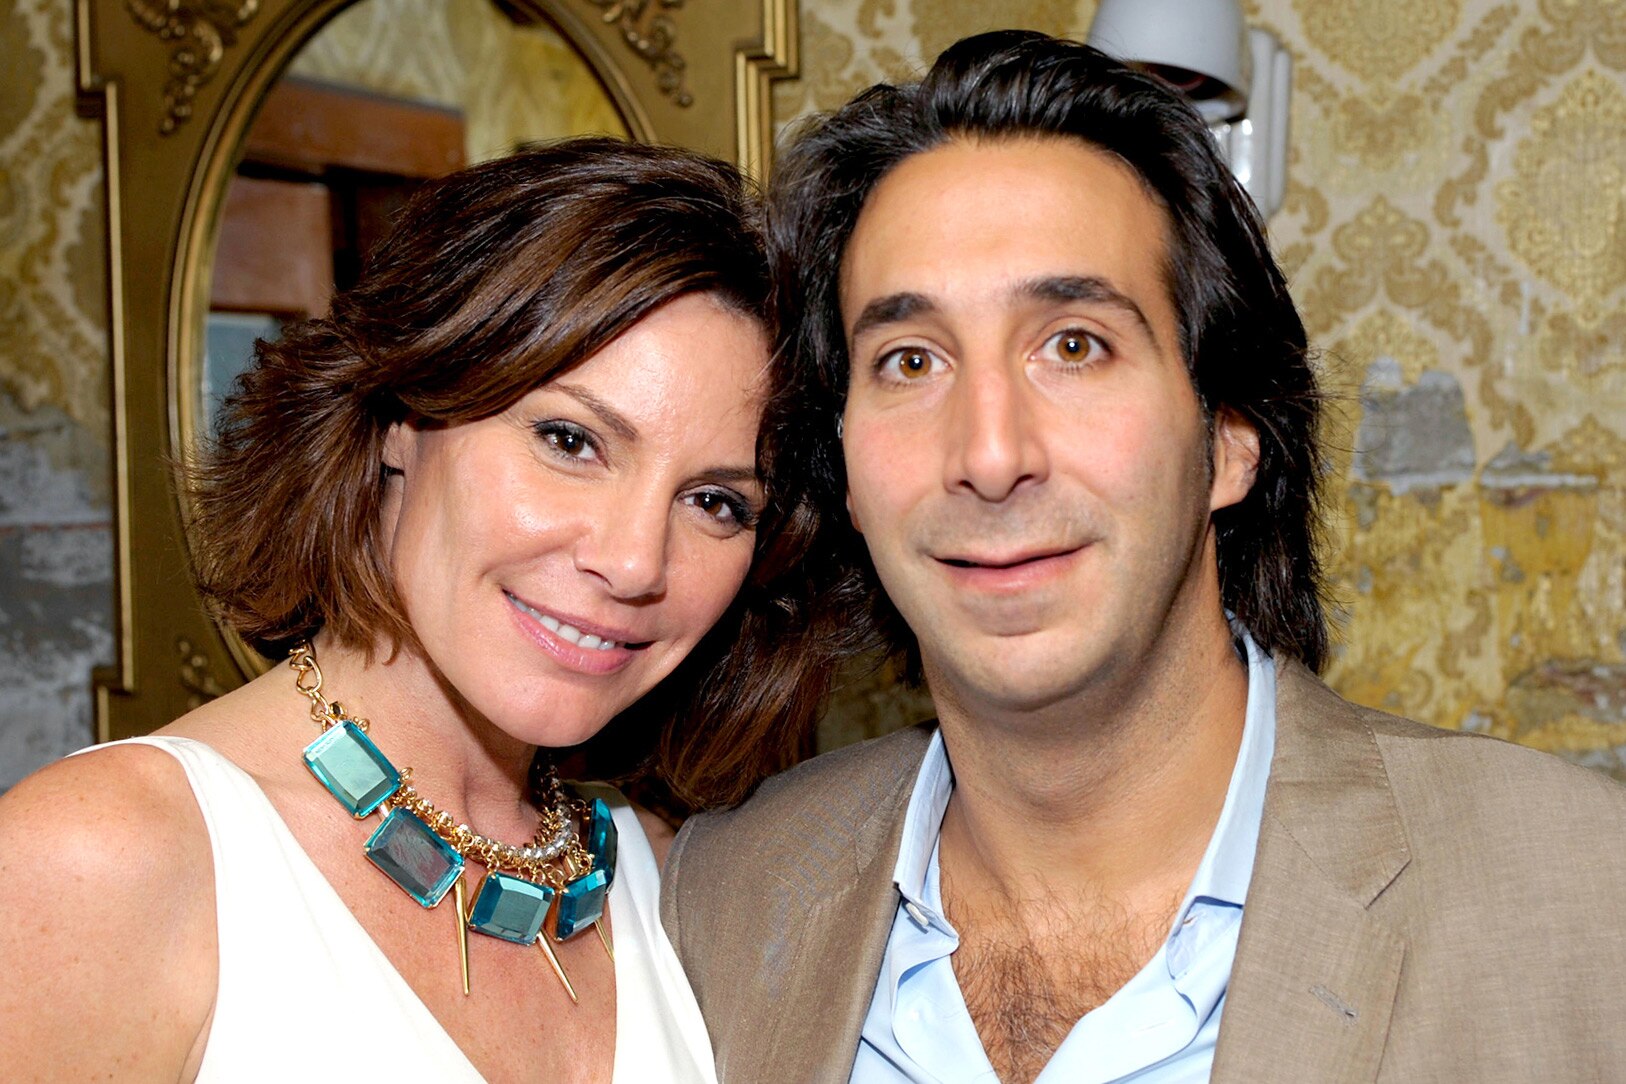 Luann de Lesseps and Jacques Azoulay's Friendship Update.